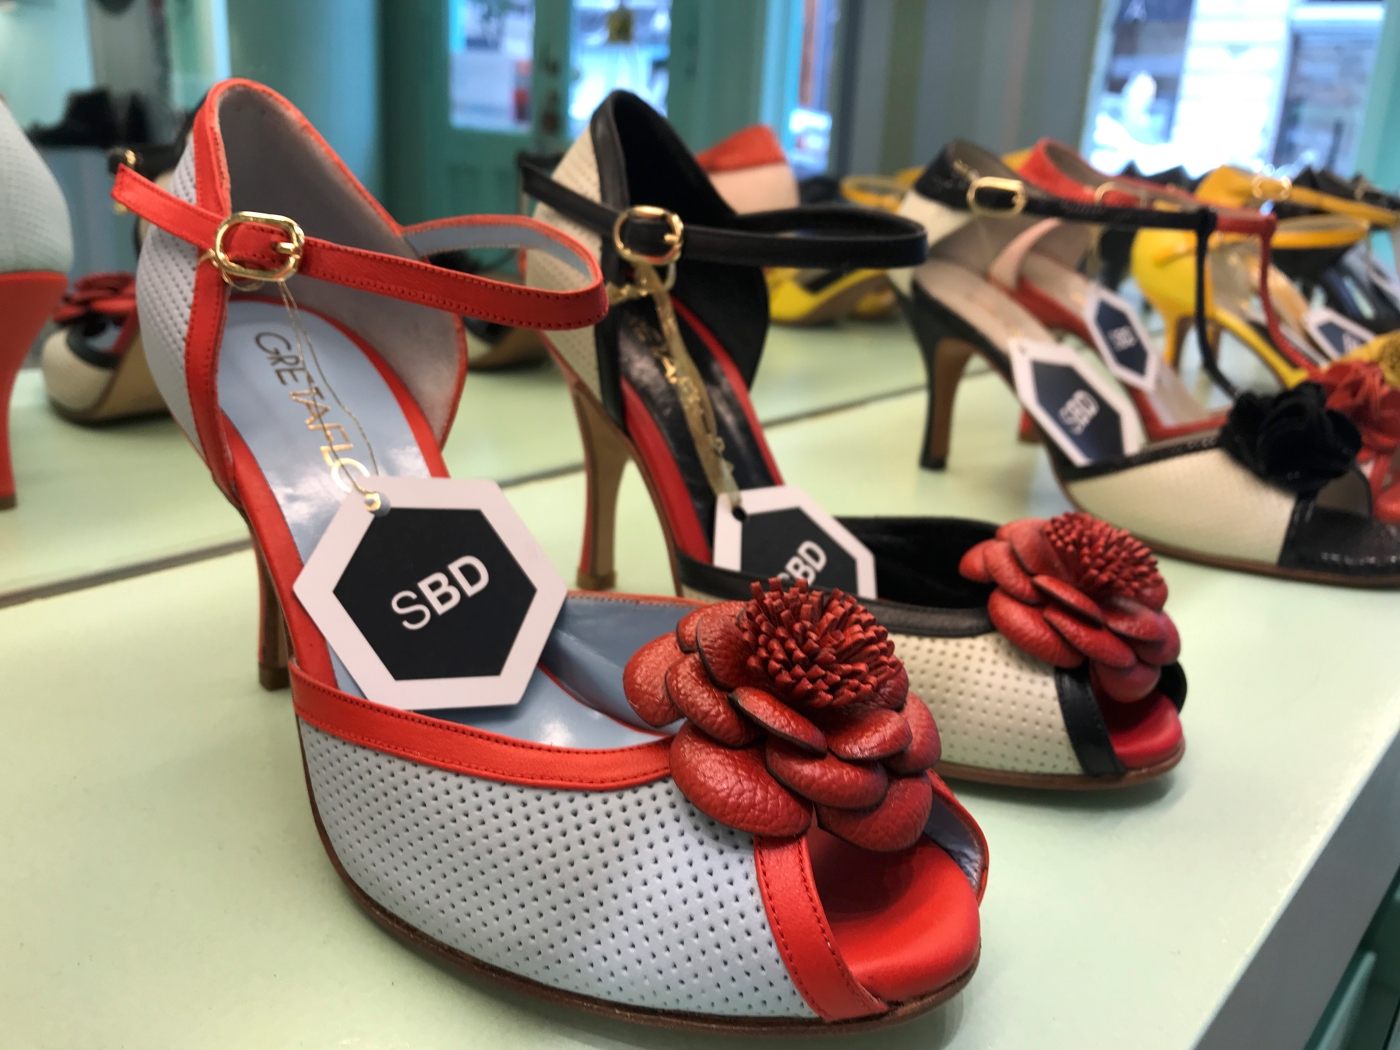 A photo of beautiful elegant Amalia Celeste Rojo tango stilettos at the GretaFlora shoe shop in Buenos Aires, Argentina. If you're interested in fashion and high heel shopping in Buenos Aires, this is one boutique you won't want to miss. Photo Courtesy of FoodWaterShoes